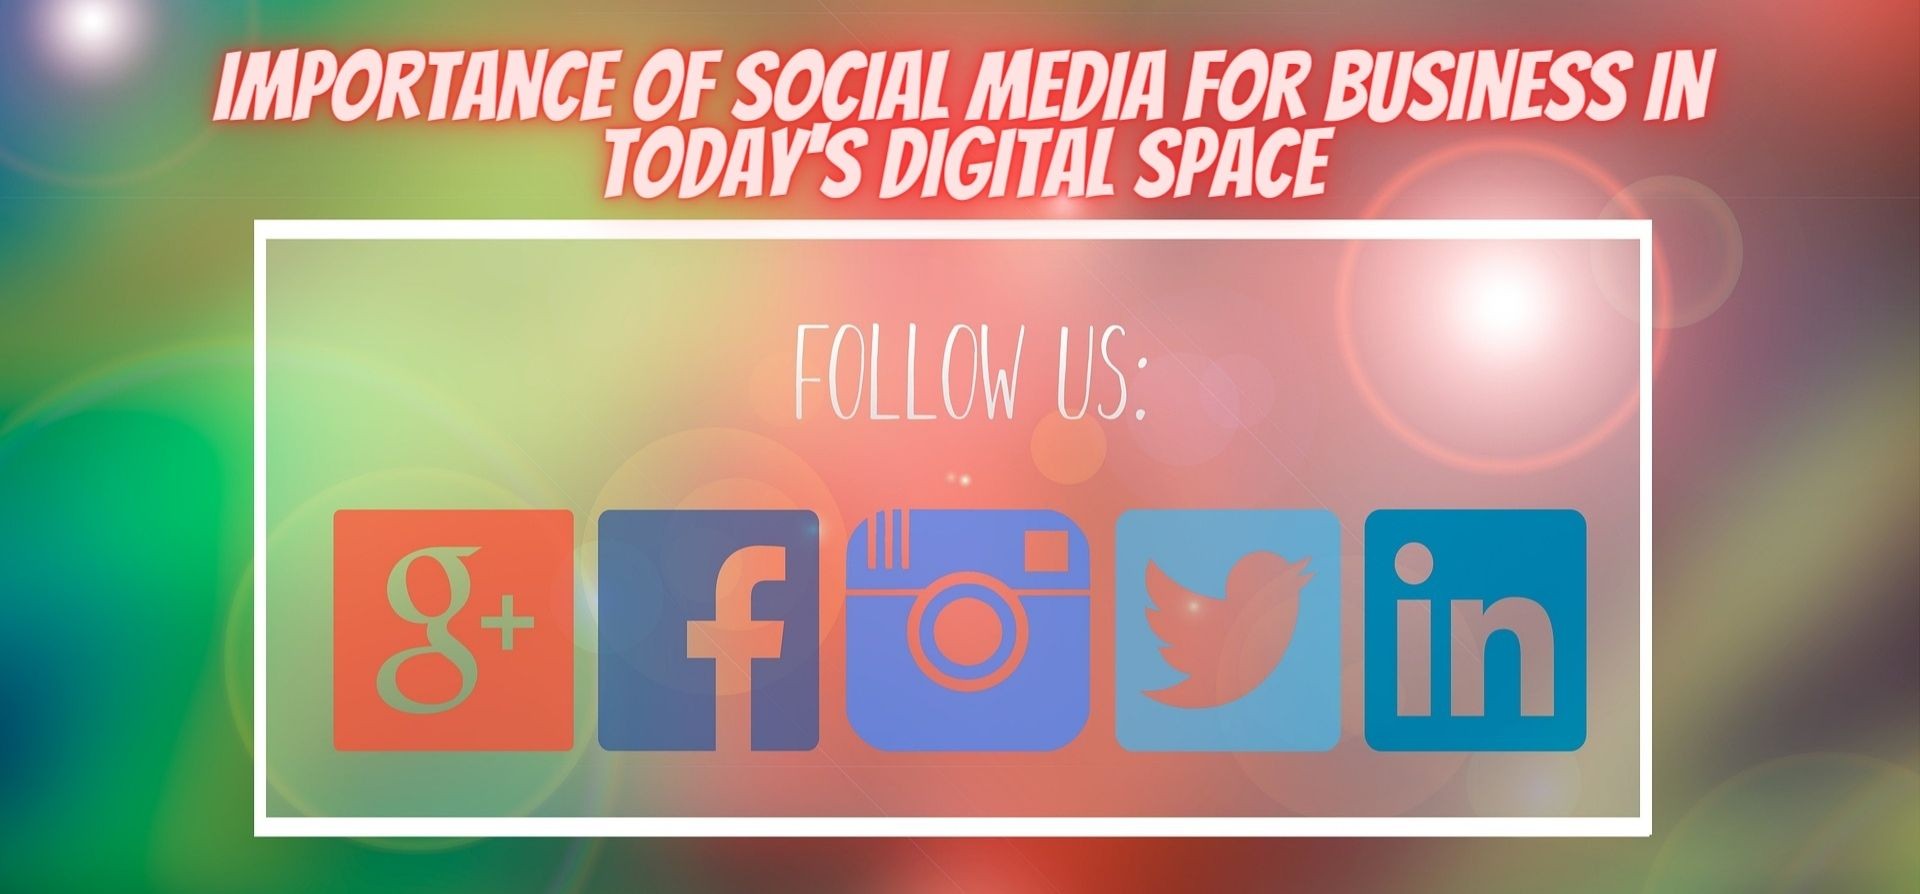 Importance-of-social-media-for-business